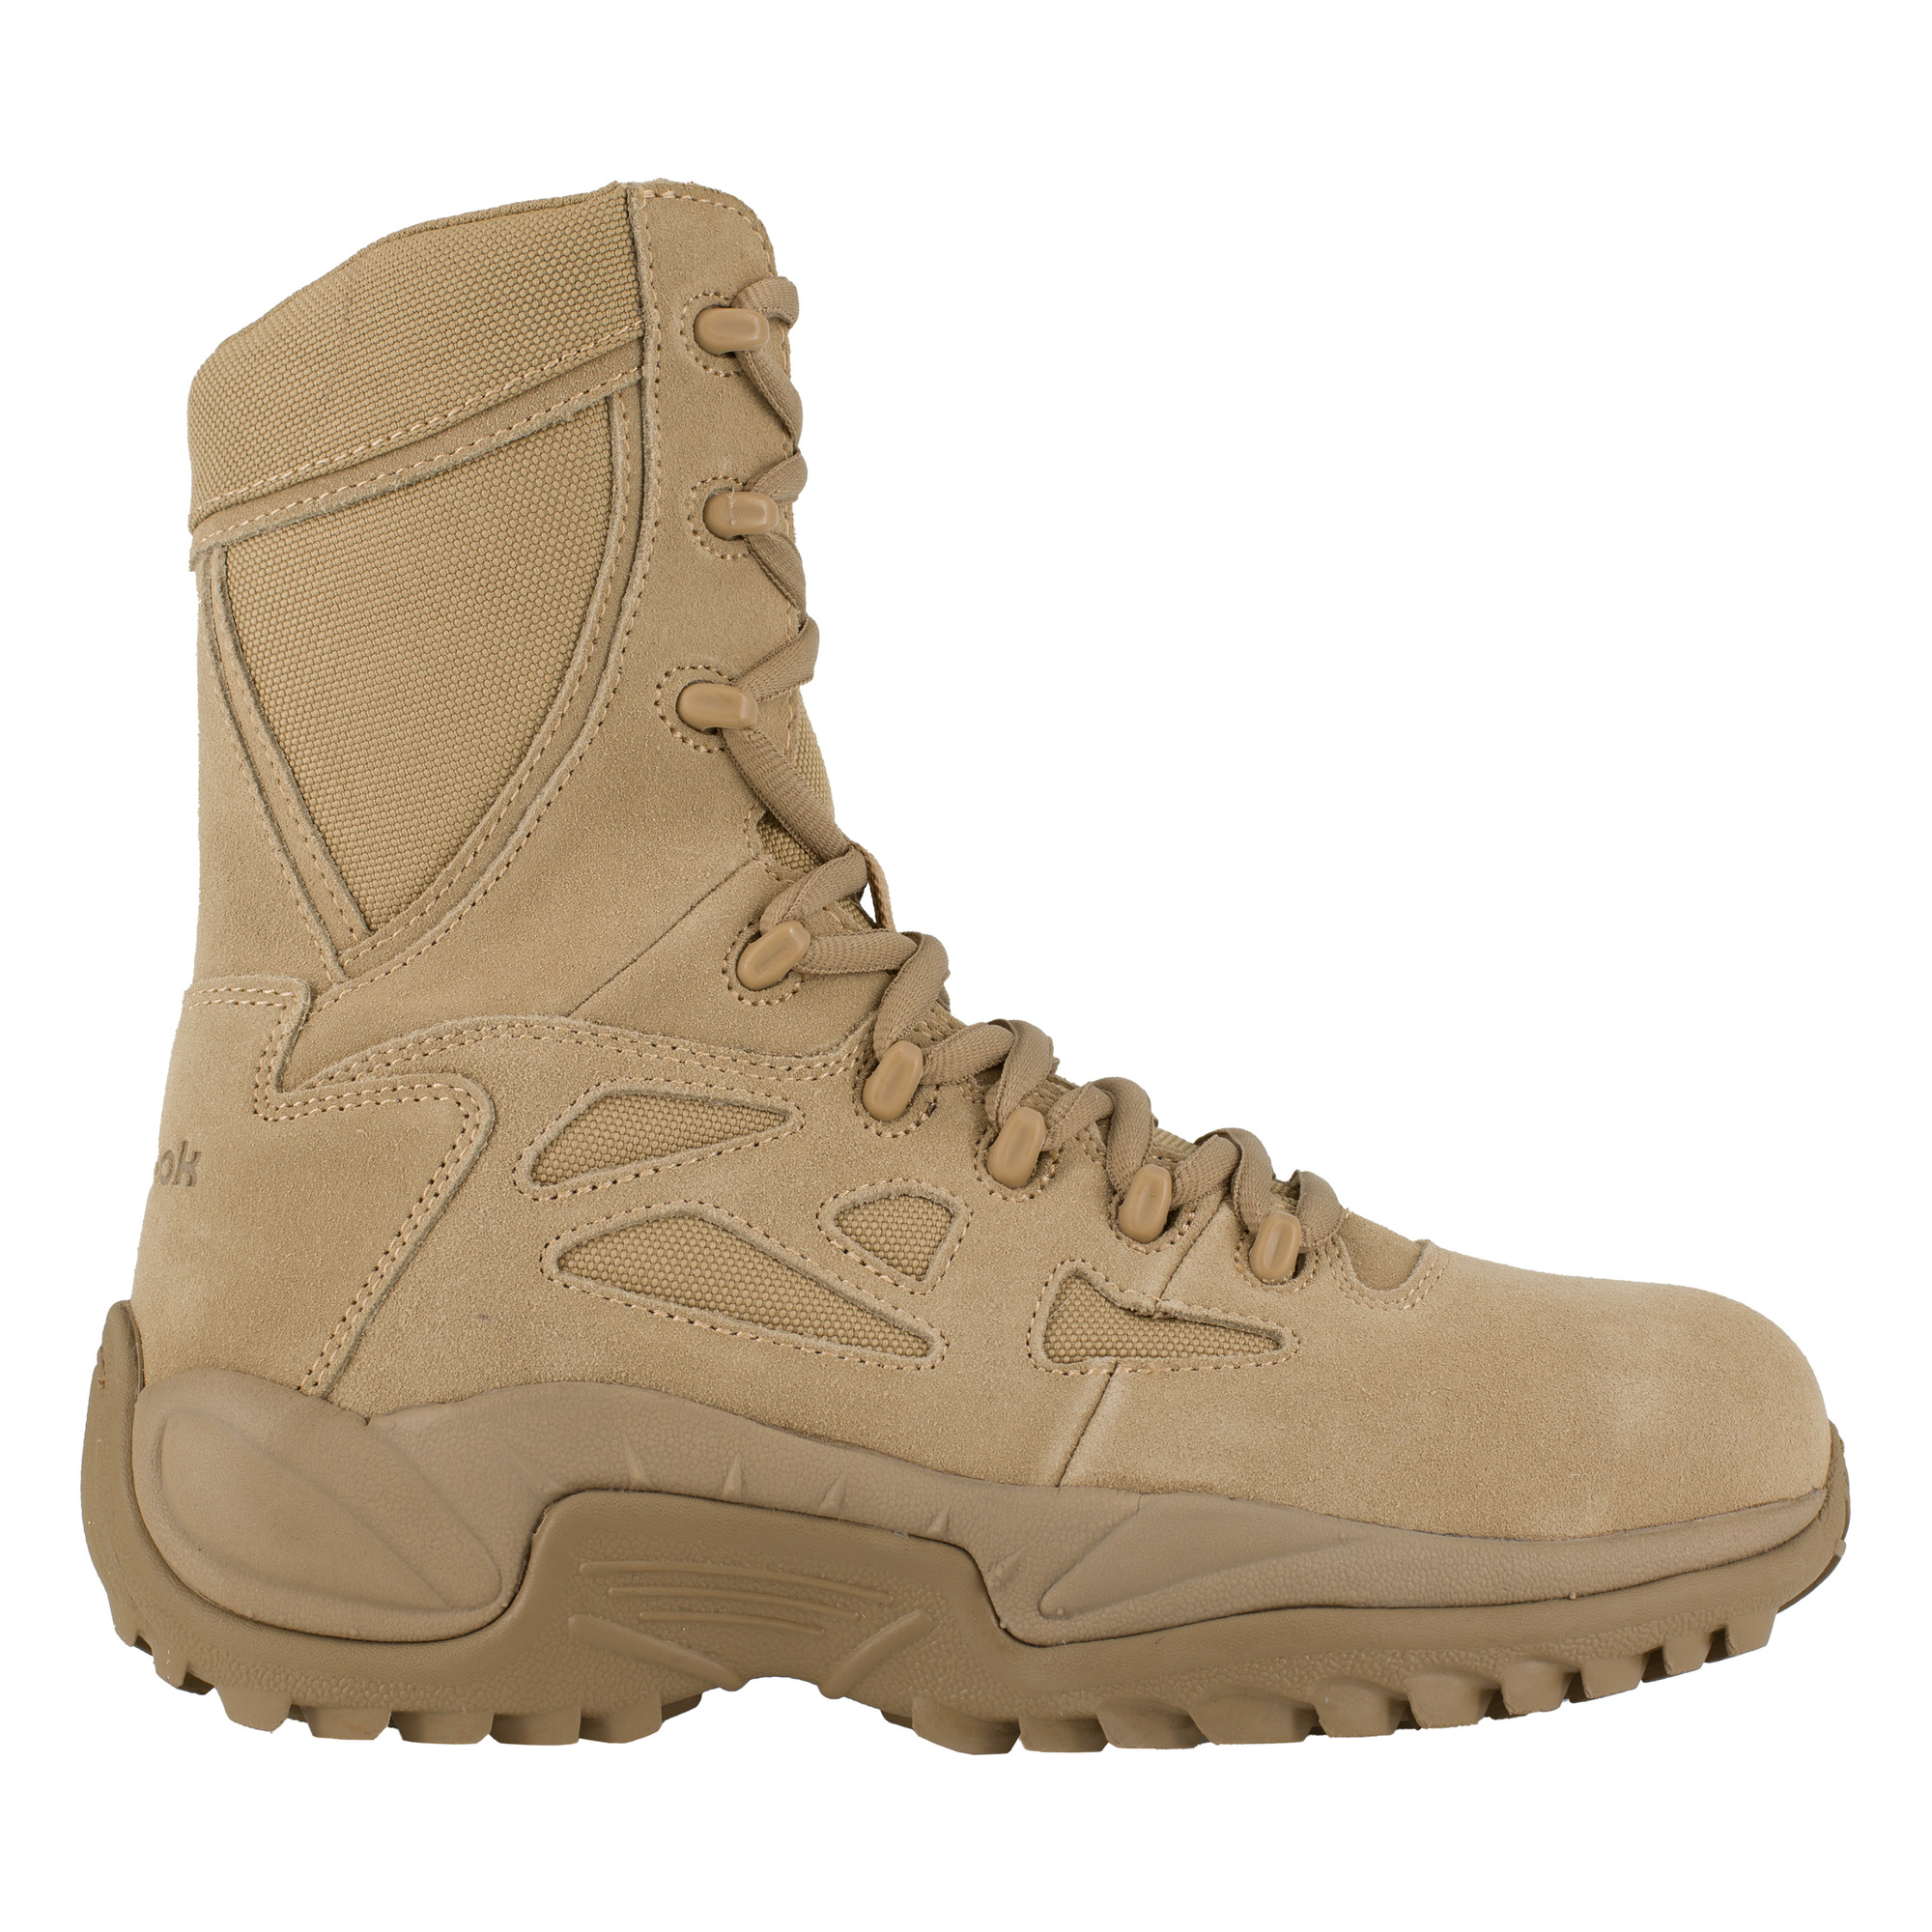 Reebok, 8Inch Stealth Tactical Boot with Side Zipper, Size 11, Width Wide, Color Desert Tan, Model RB894